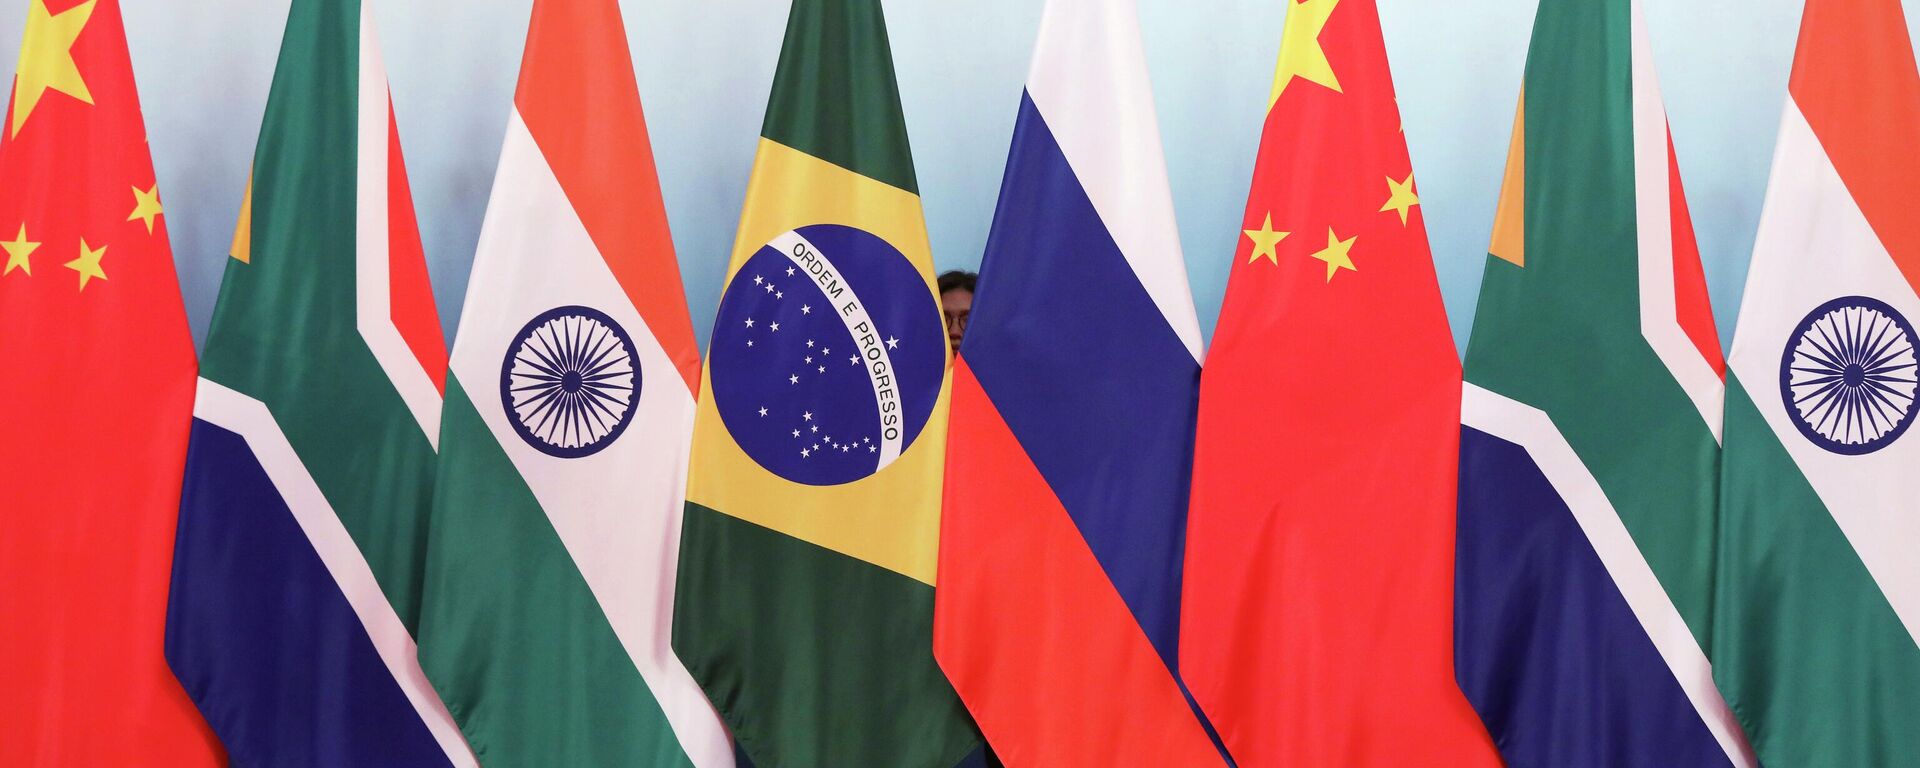 Staff worker stands behind national flags of Brazil, Russia, China, South Africa and India to tidy the flags ahead of a group photo during the BRICS Summit at the Xiamen International Conference and Exhibition Center in Xiamen, southeastern China's Fujian Province, Monday, Sept. 4, 2017. - Sputnik International, 1920, 03.06.2023